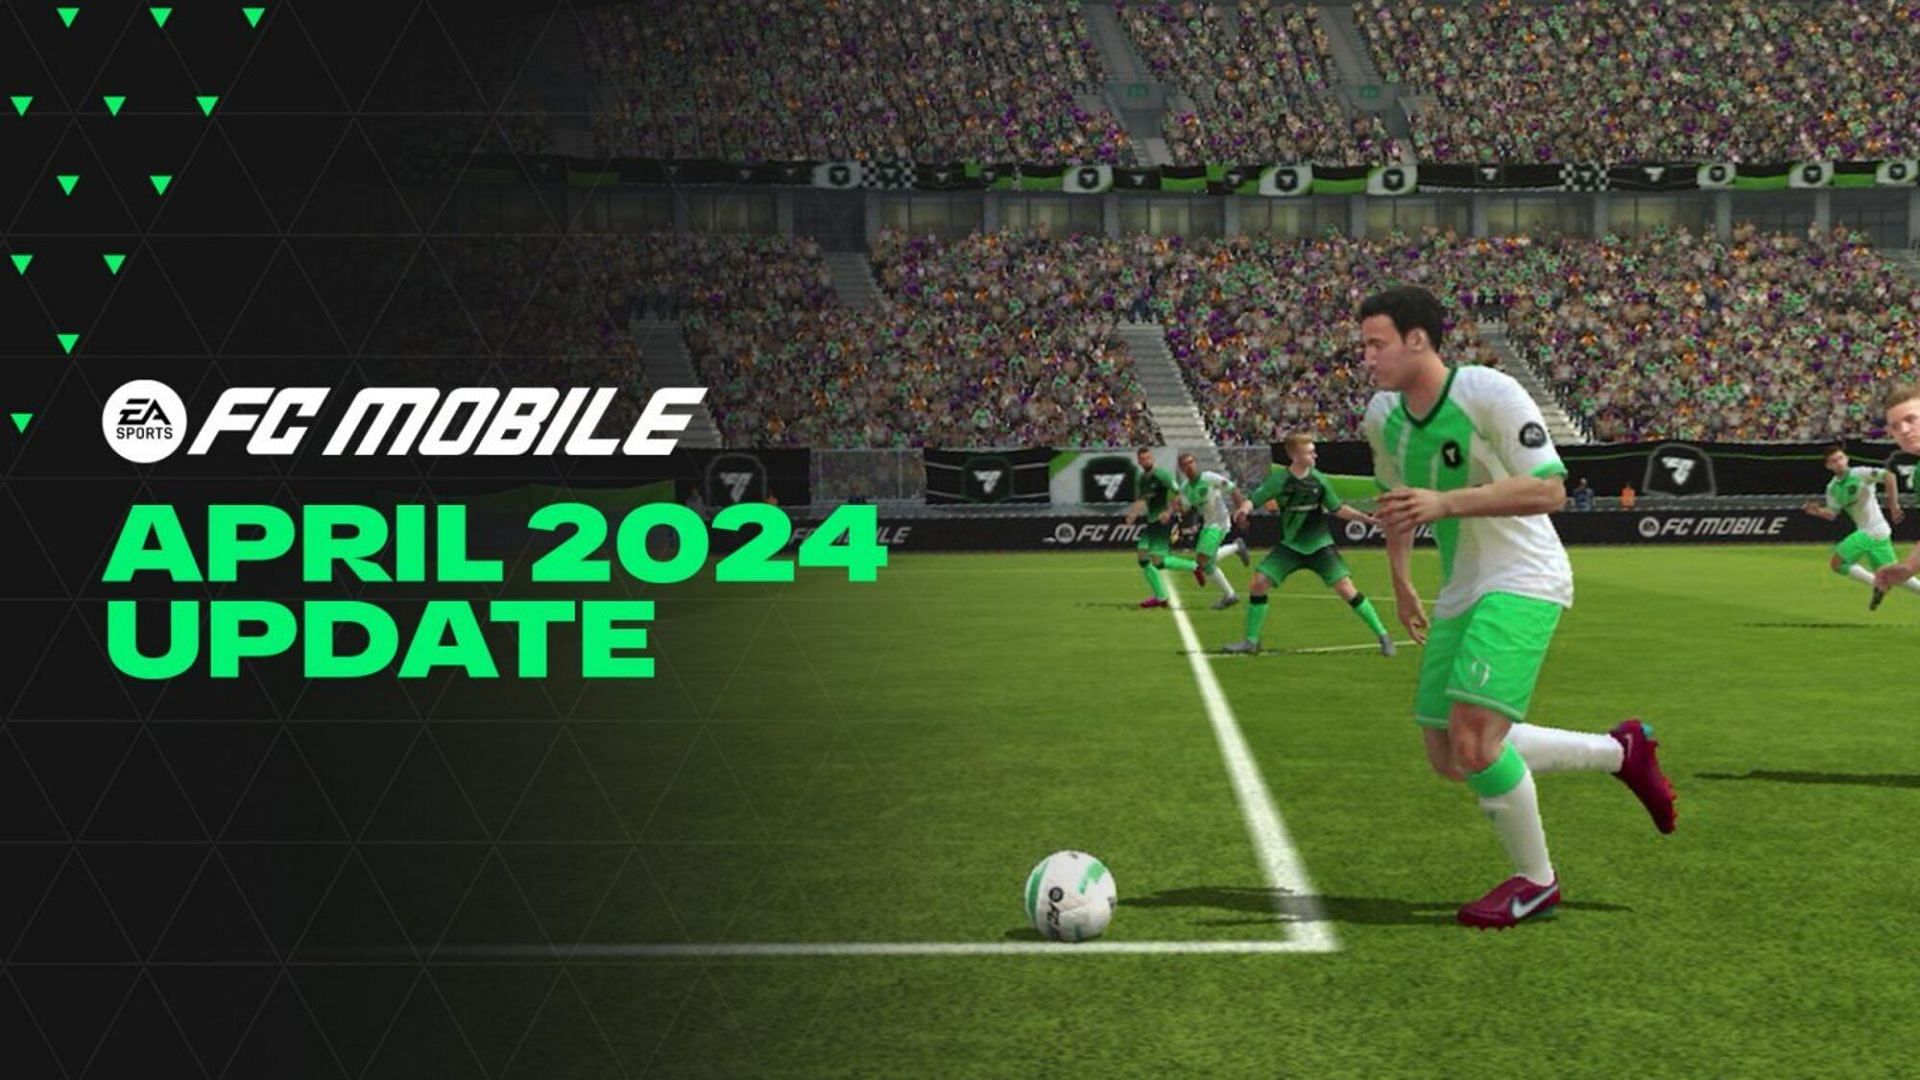 FC Mobile scheduled maintenance will bring in the all new April 9 updates